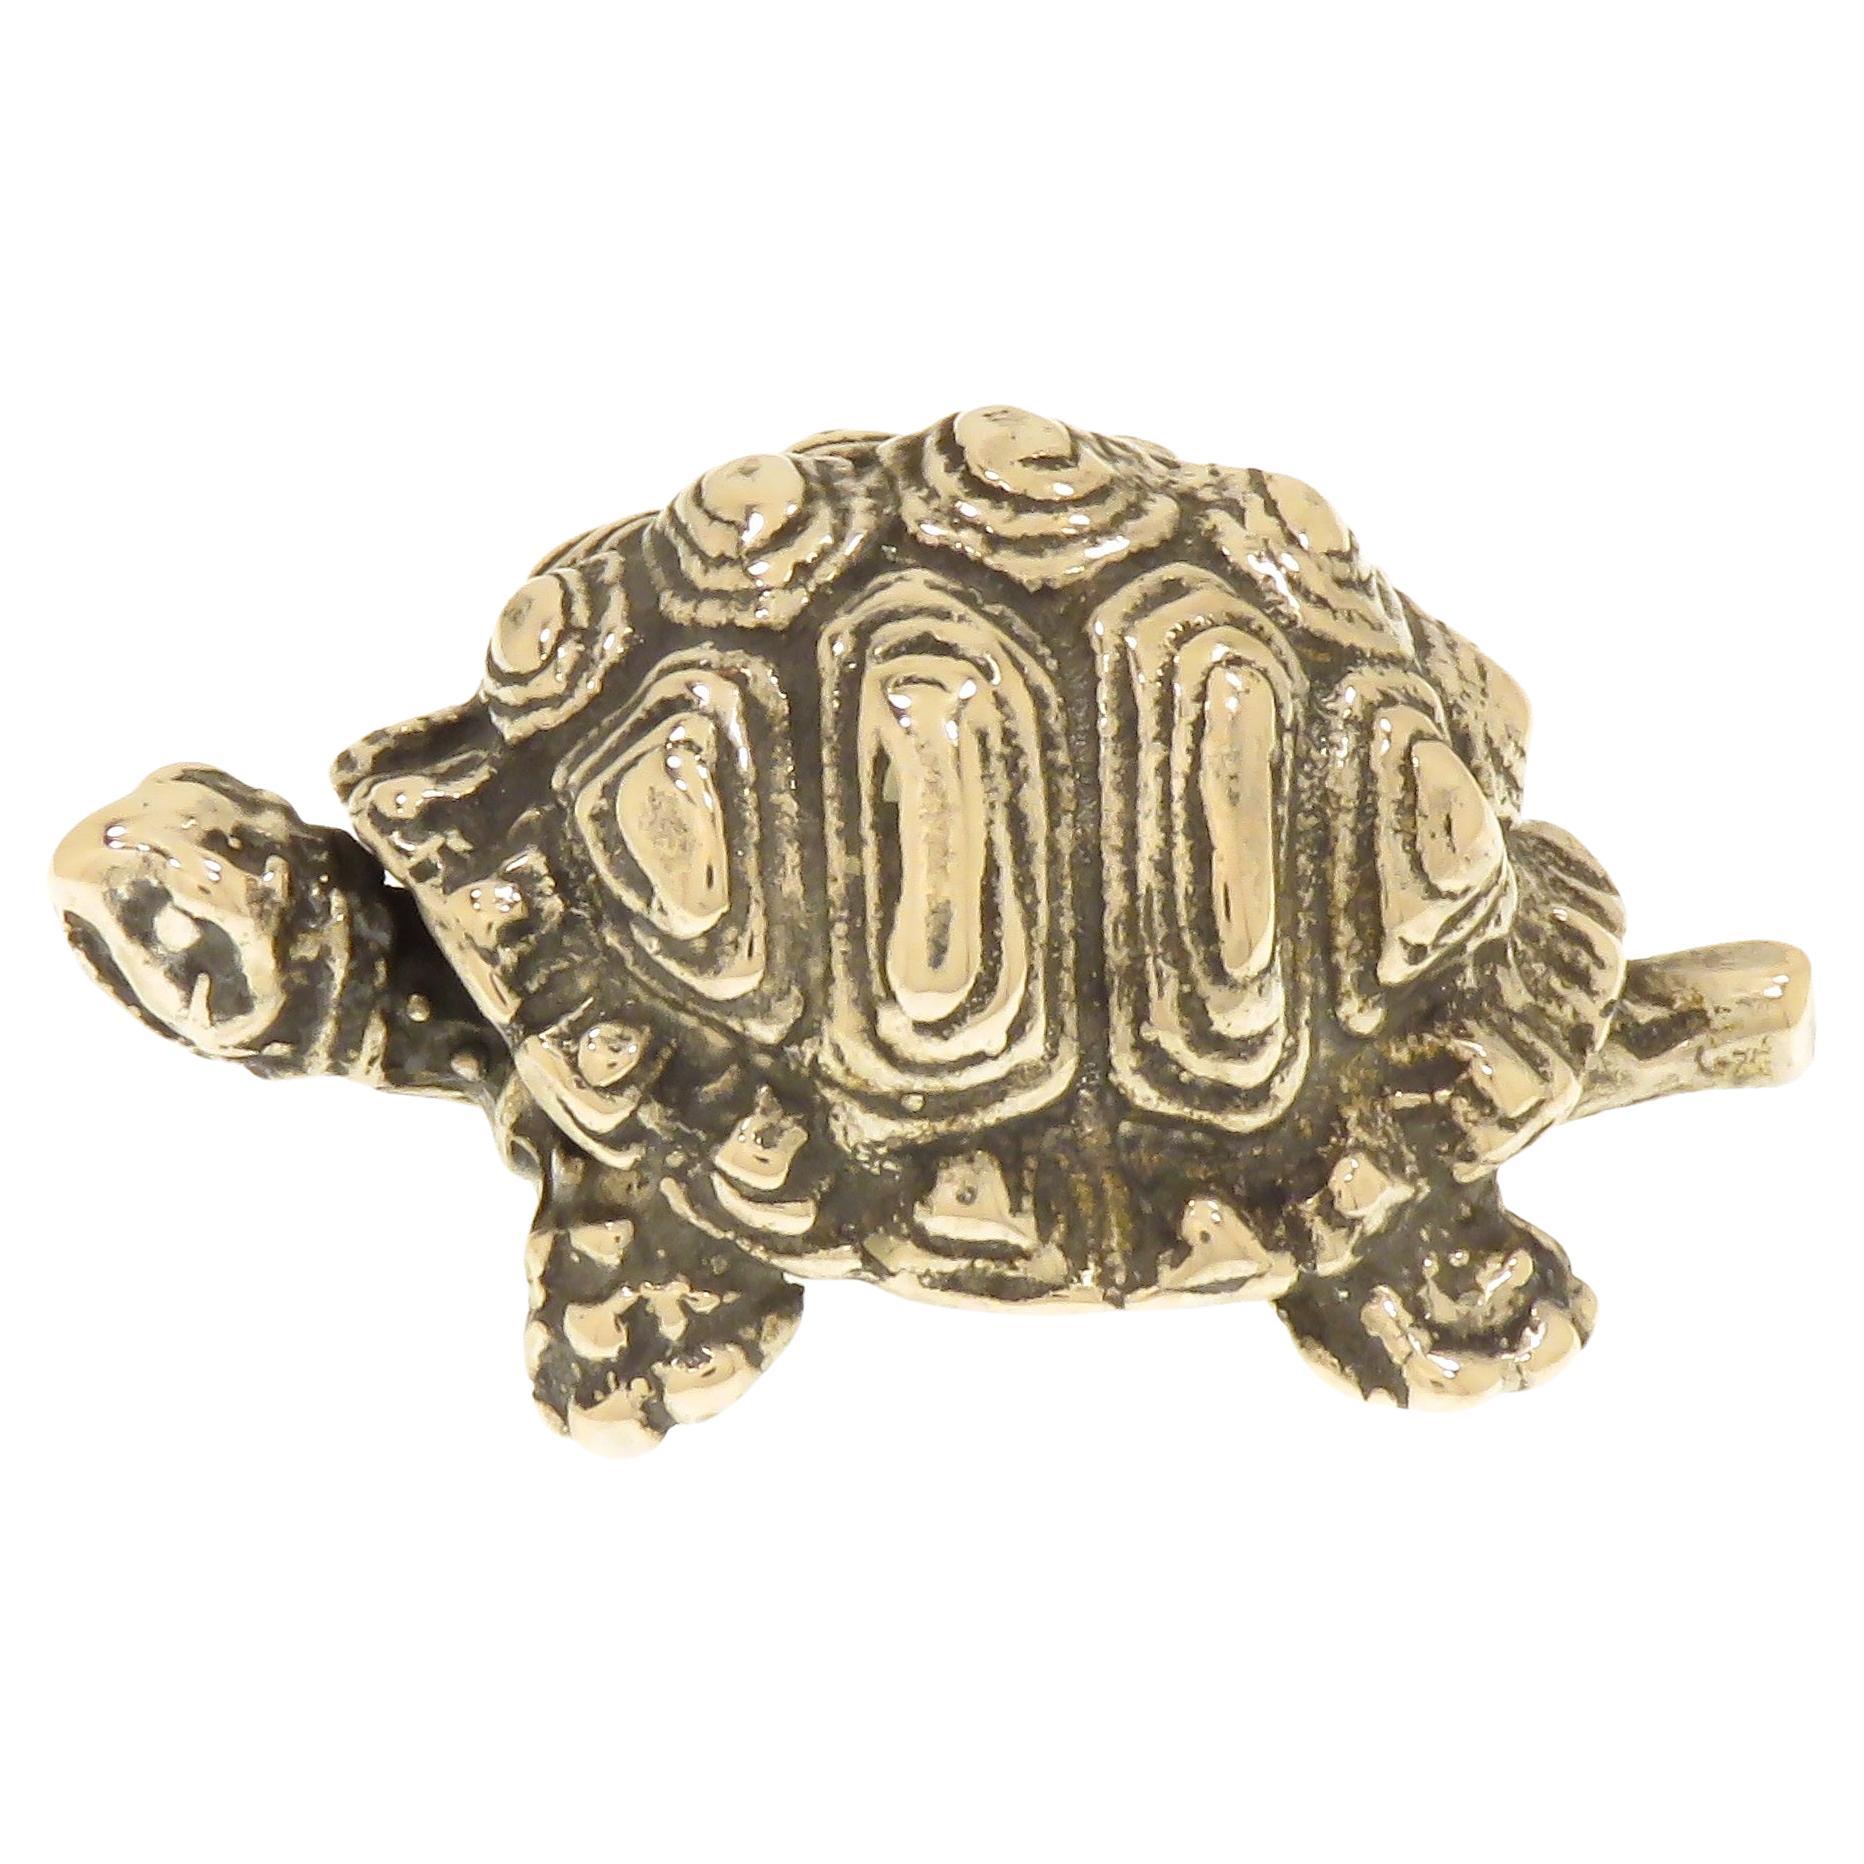 Solid Silver Turtle Figurine Vintage 1970s Made in Italy